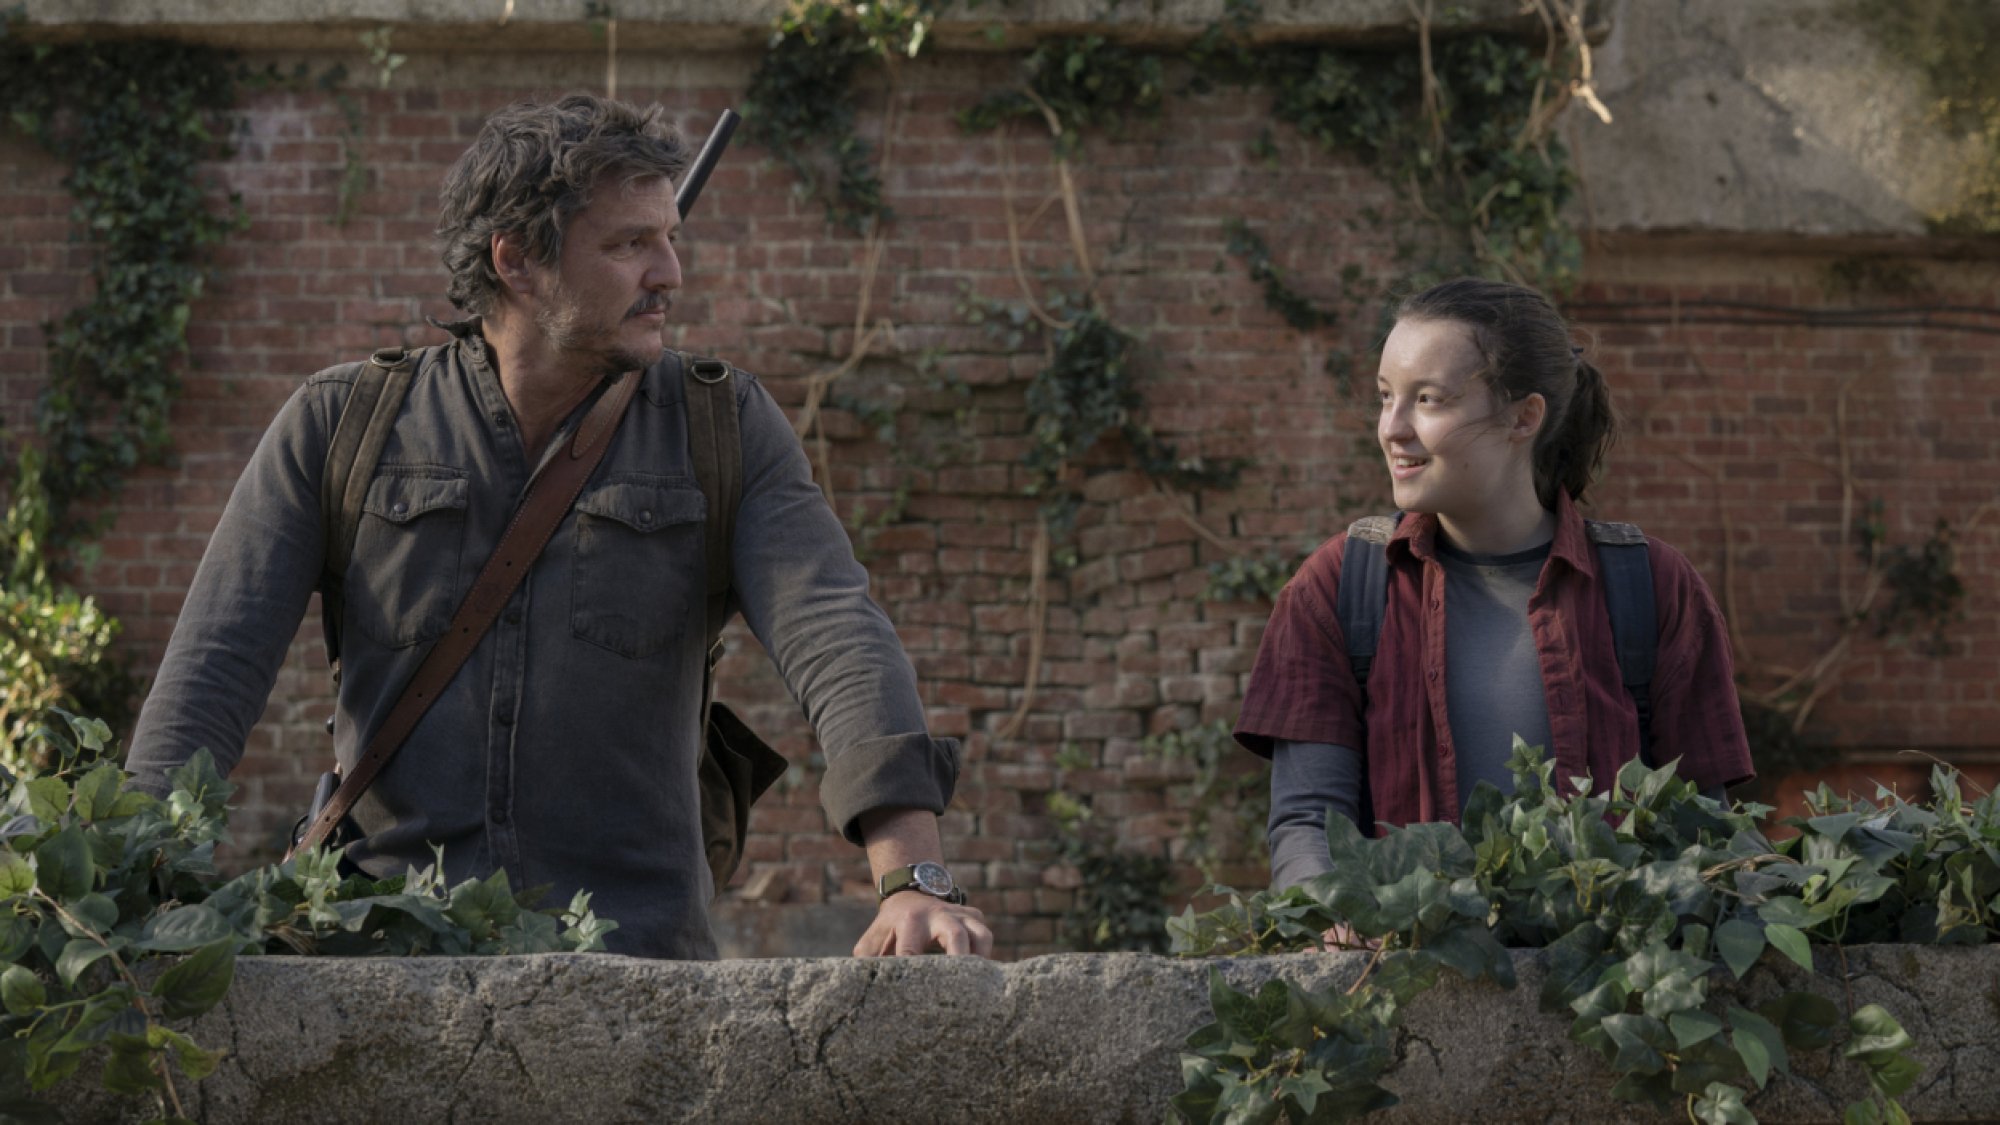 Pedro Pascal and Bella Ramsey share a blissful moment in "The Last of Us."